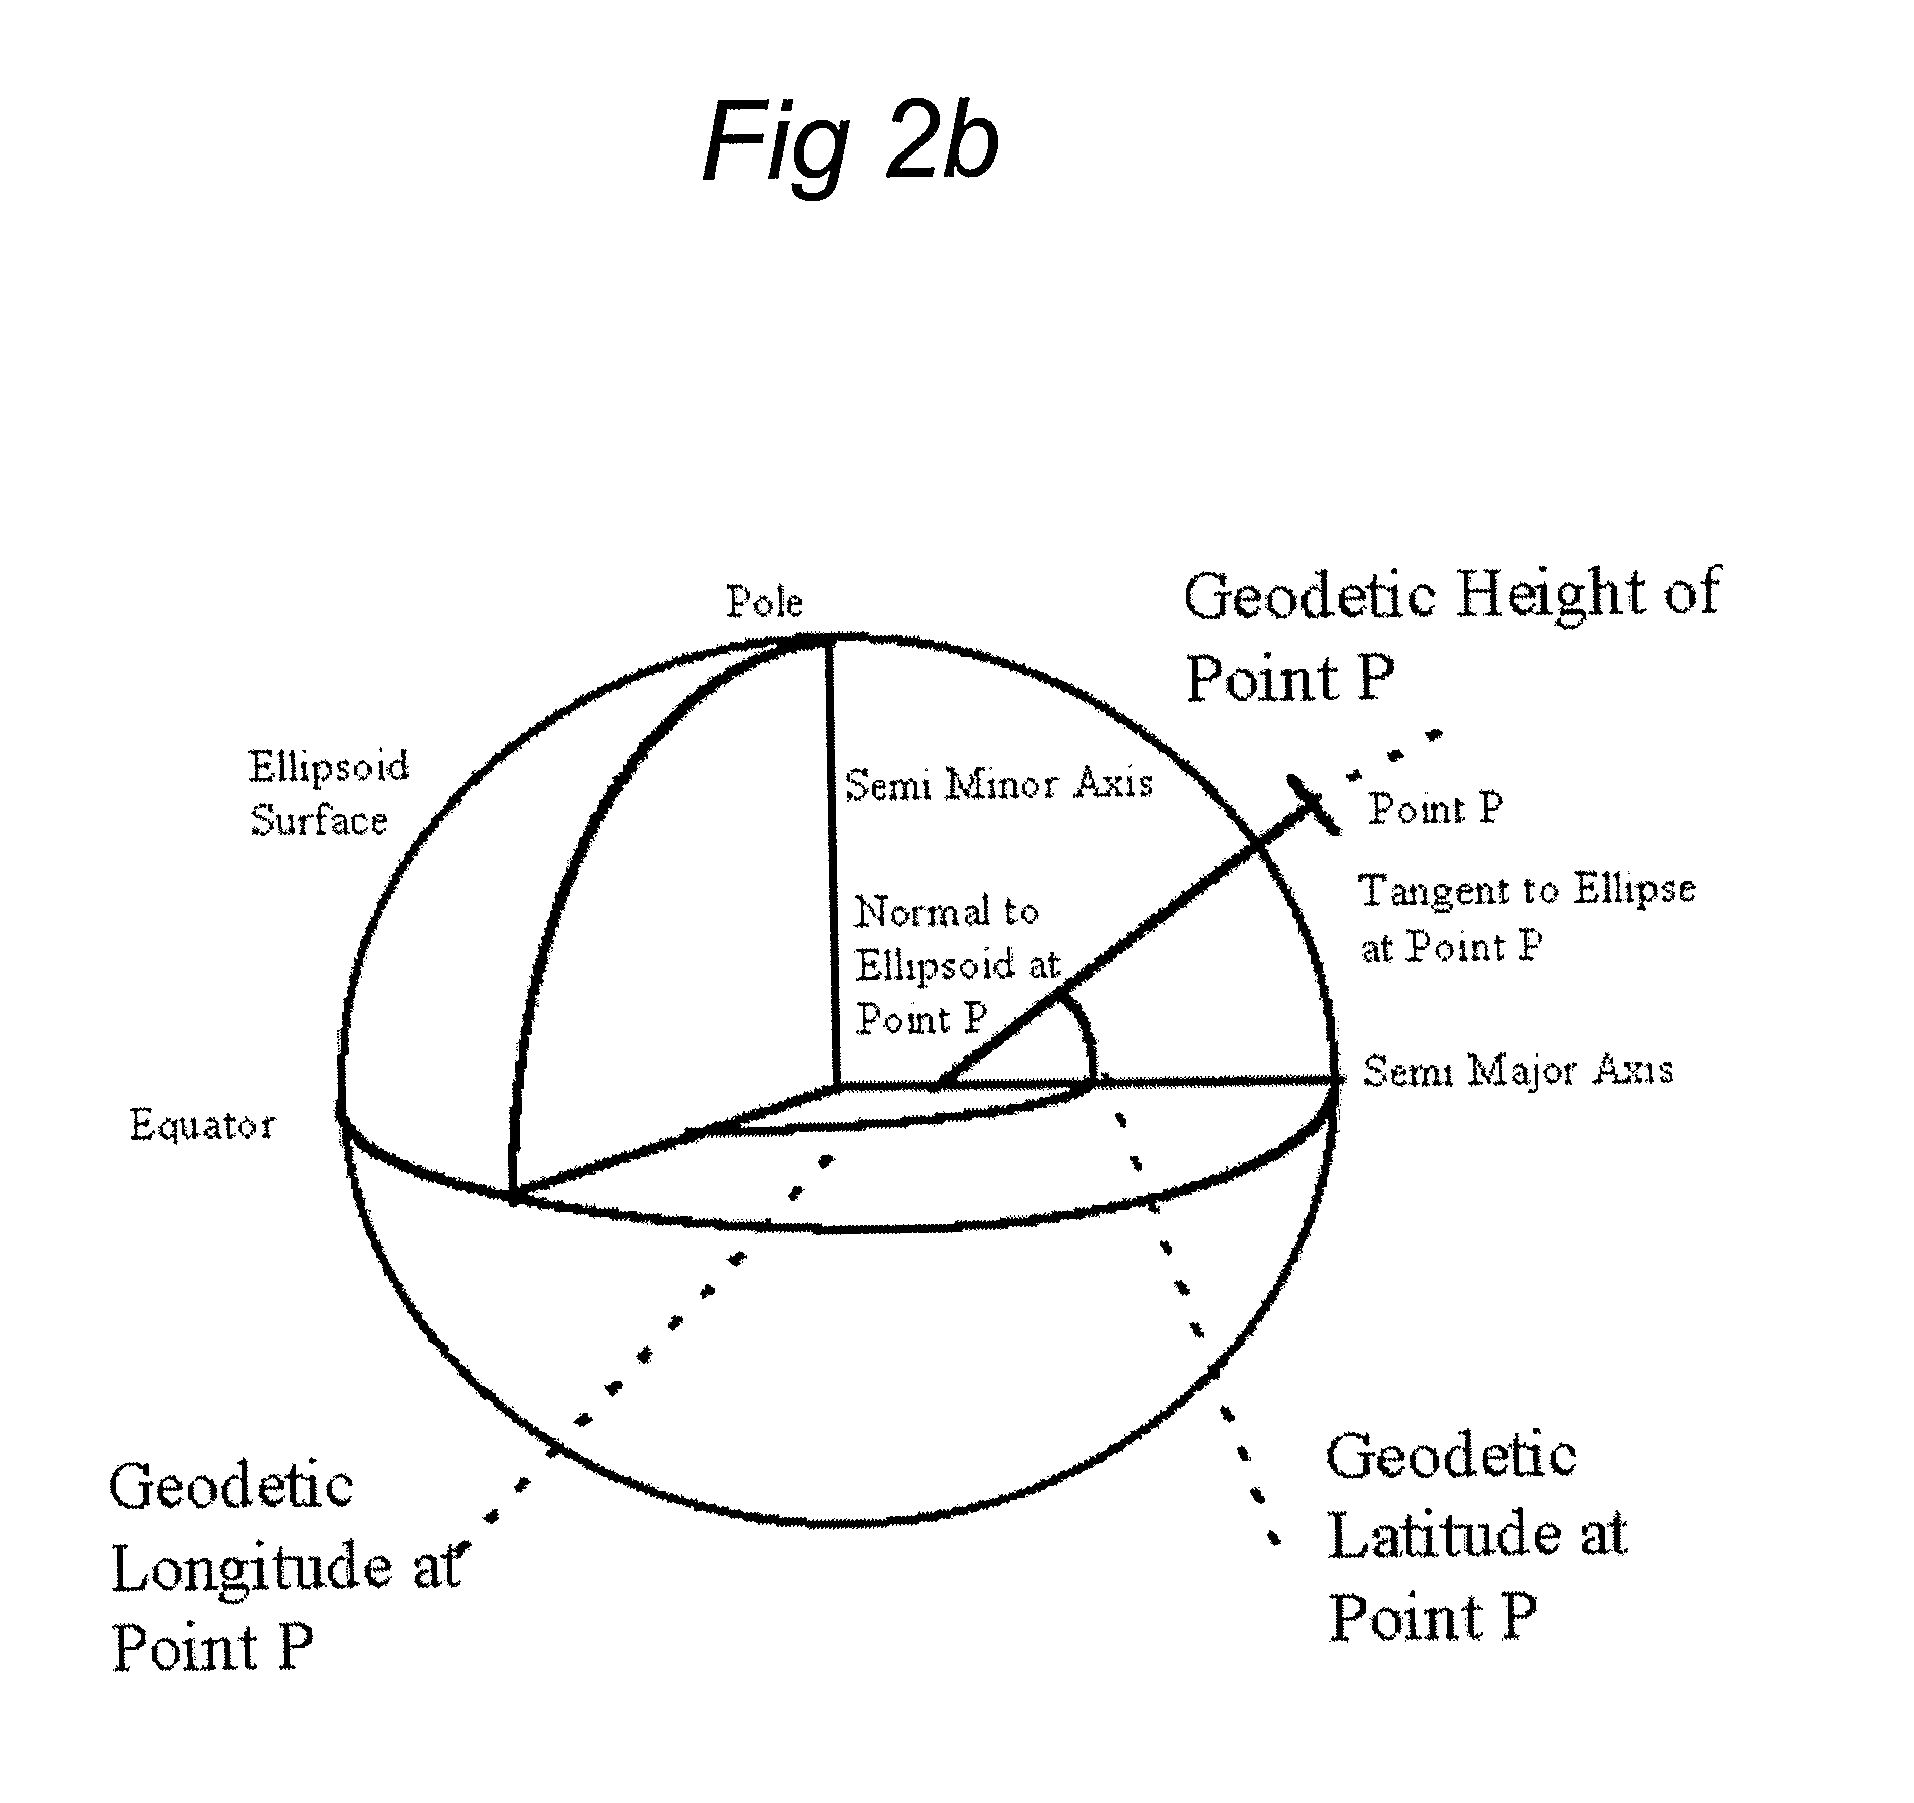 Arrangement for and method of two dimensional and three dimensional precision location and orientation determination